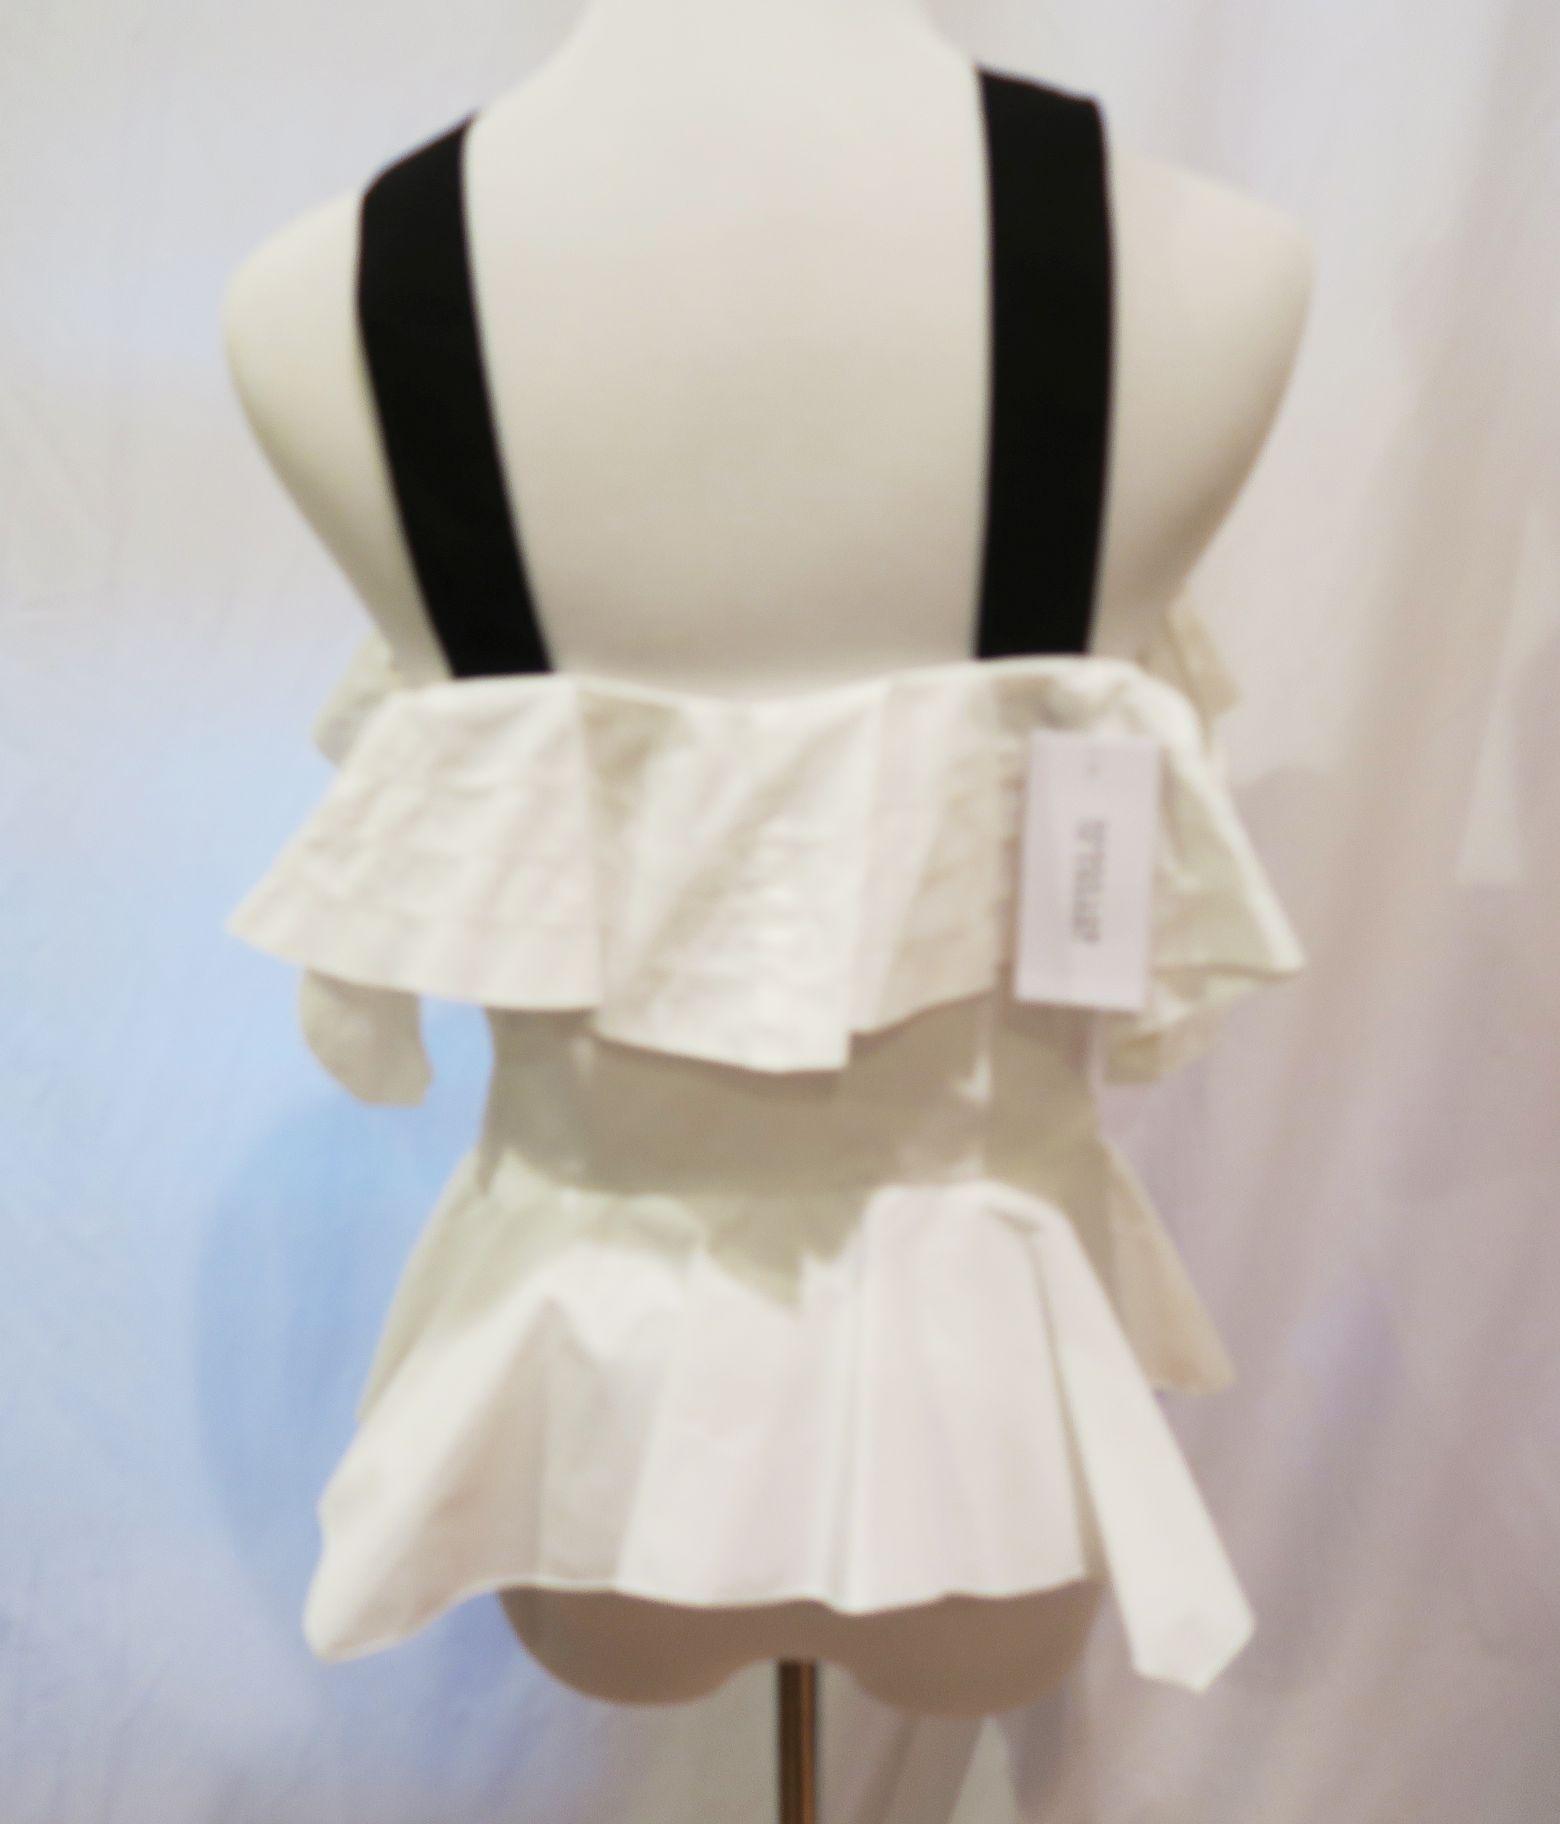 Derek Lam IO Crosby White Ruffle Top w/Black Straps/Bow, size 2, new with tags - $395